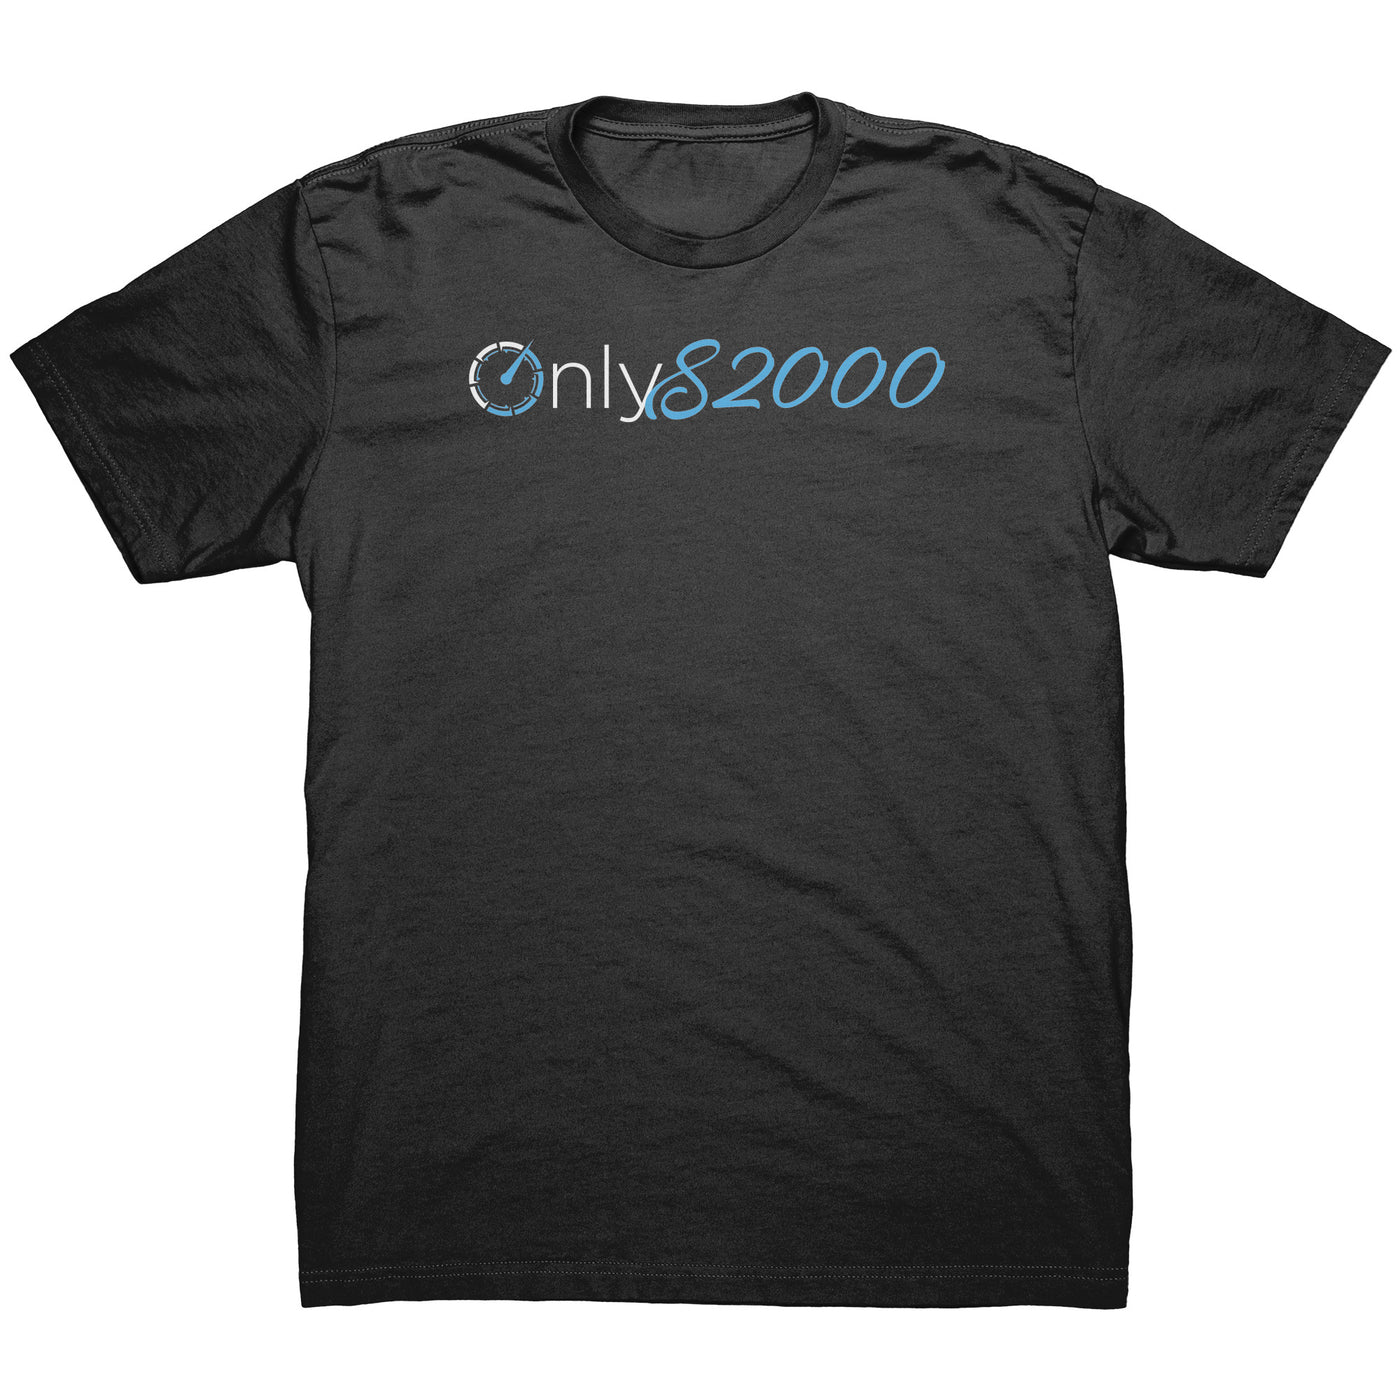 Only S2000 Shirt